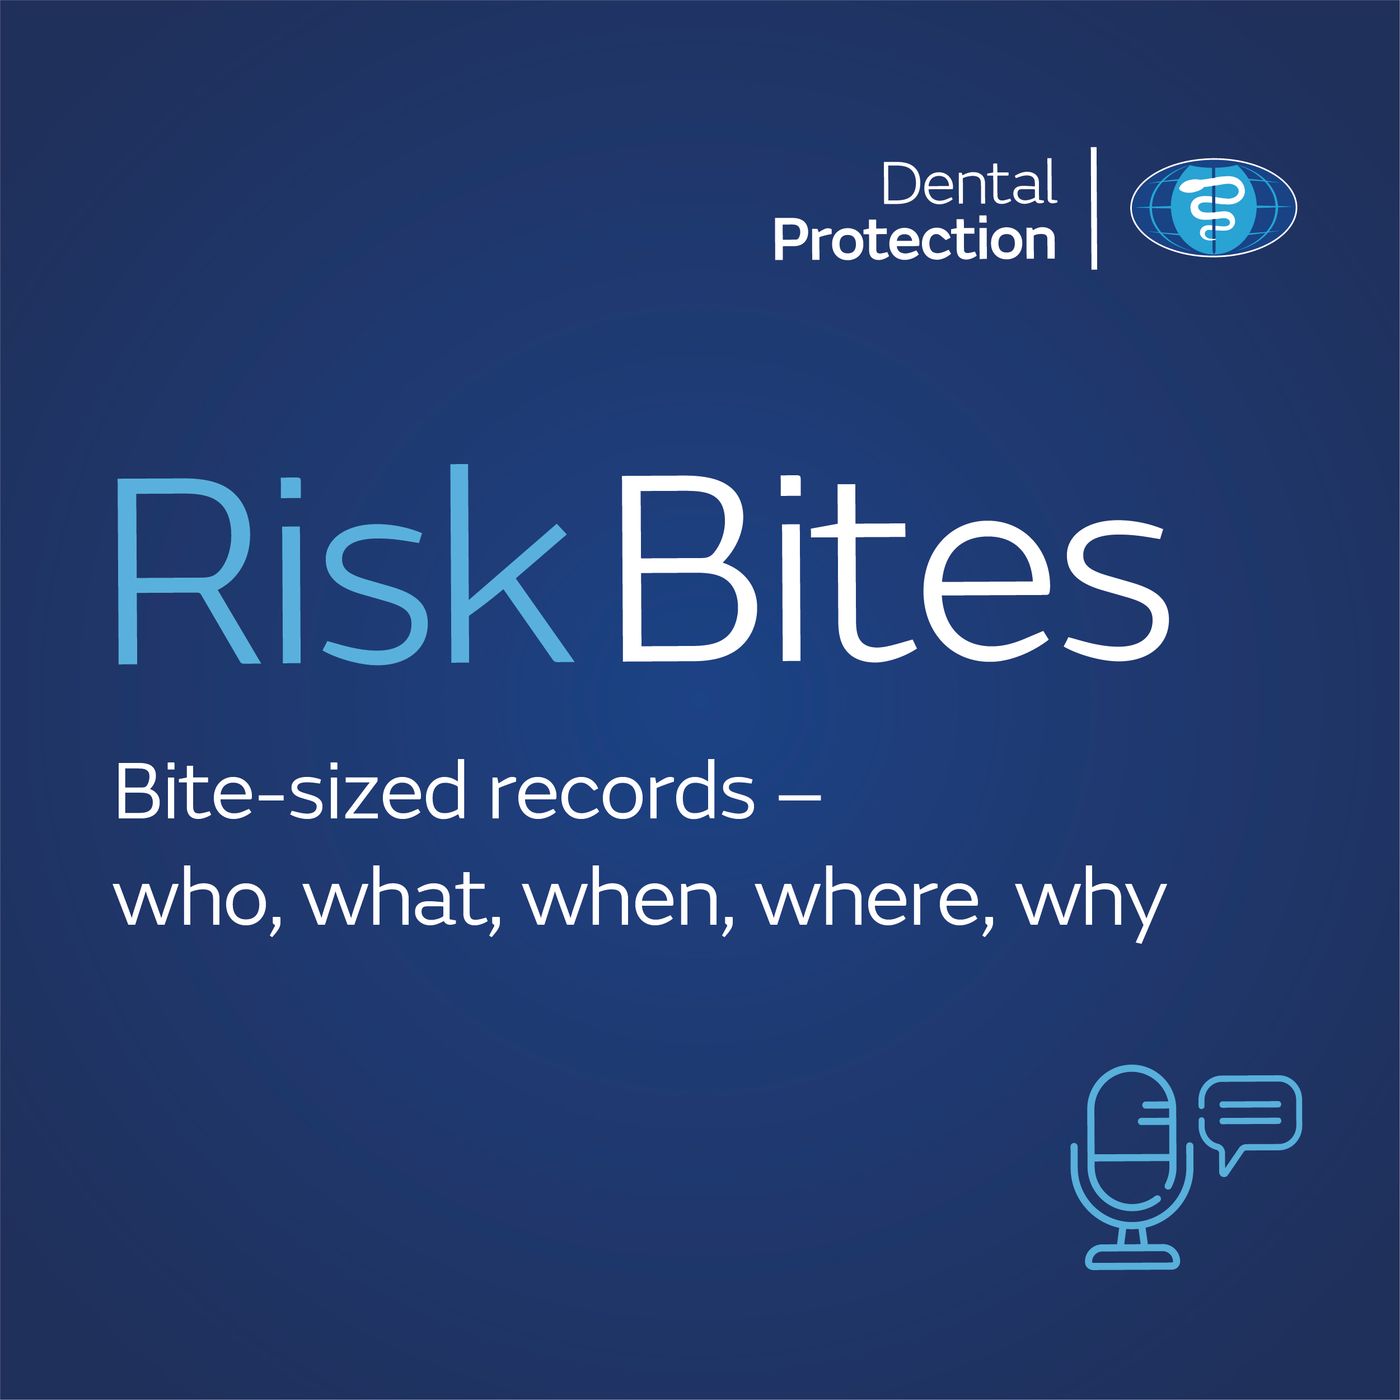 RiskBites: Bite-sized records – who, what, when, where, why